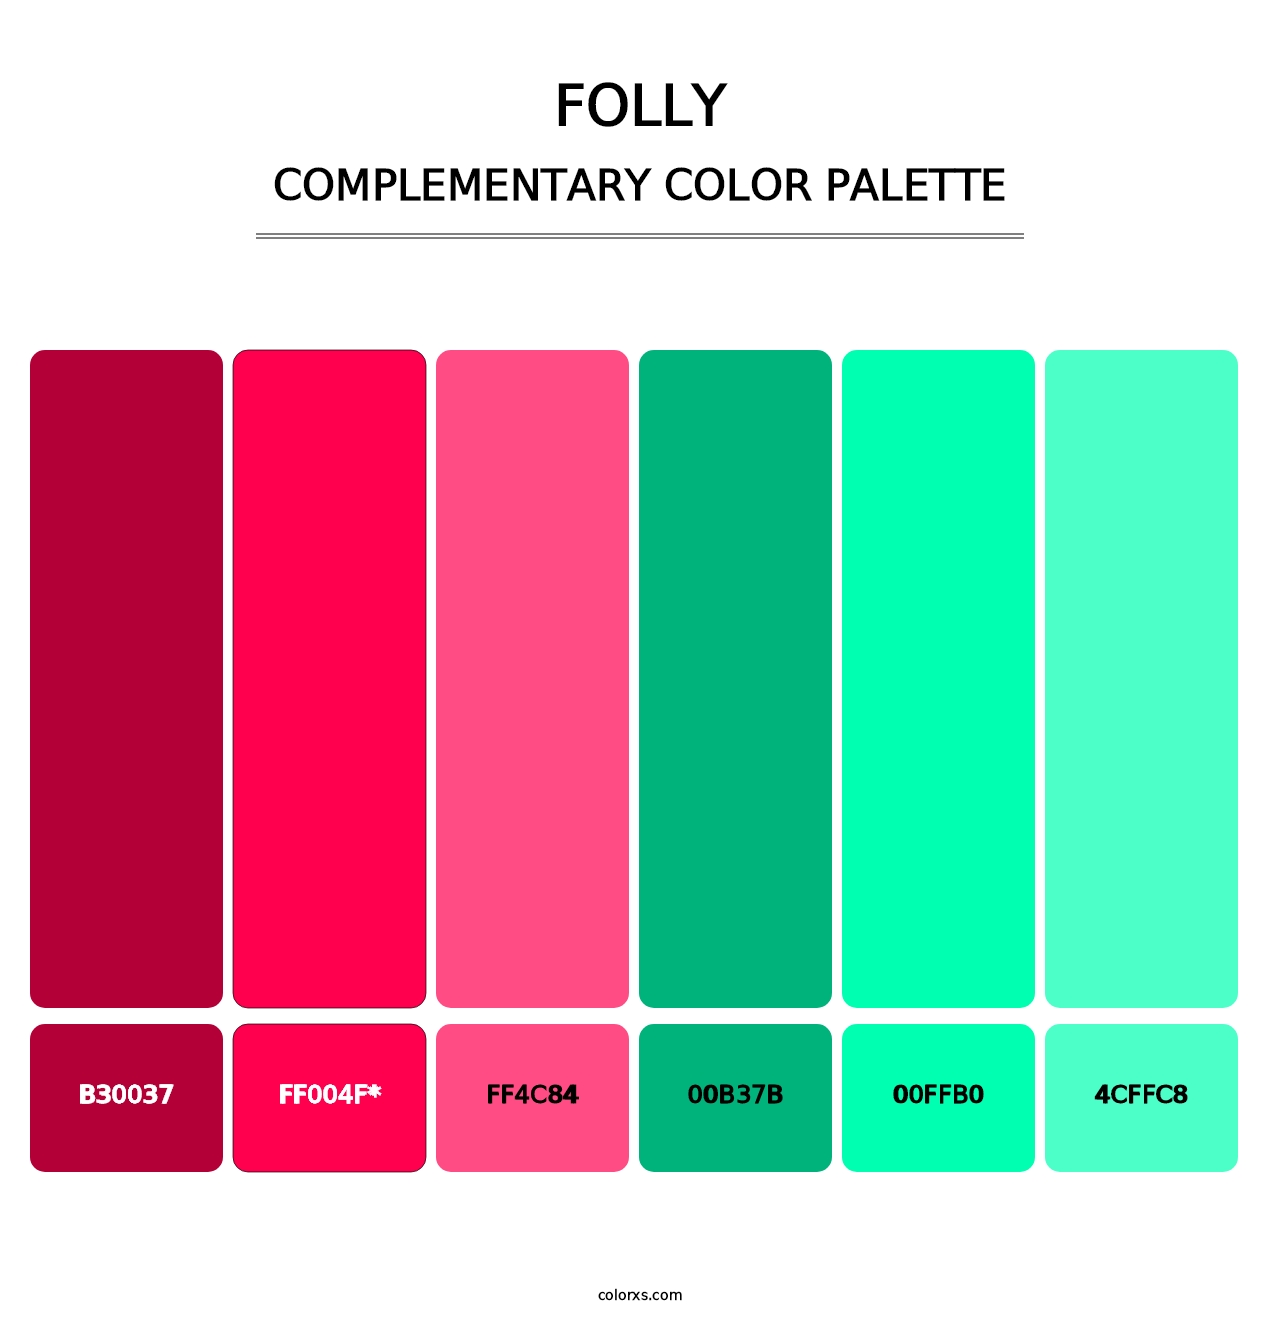 Folly - Complementary Color Palette